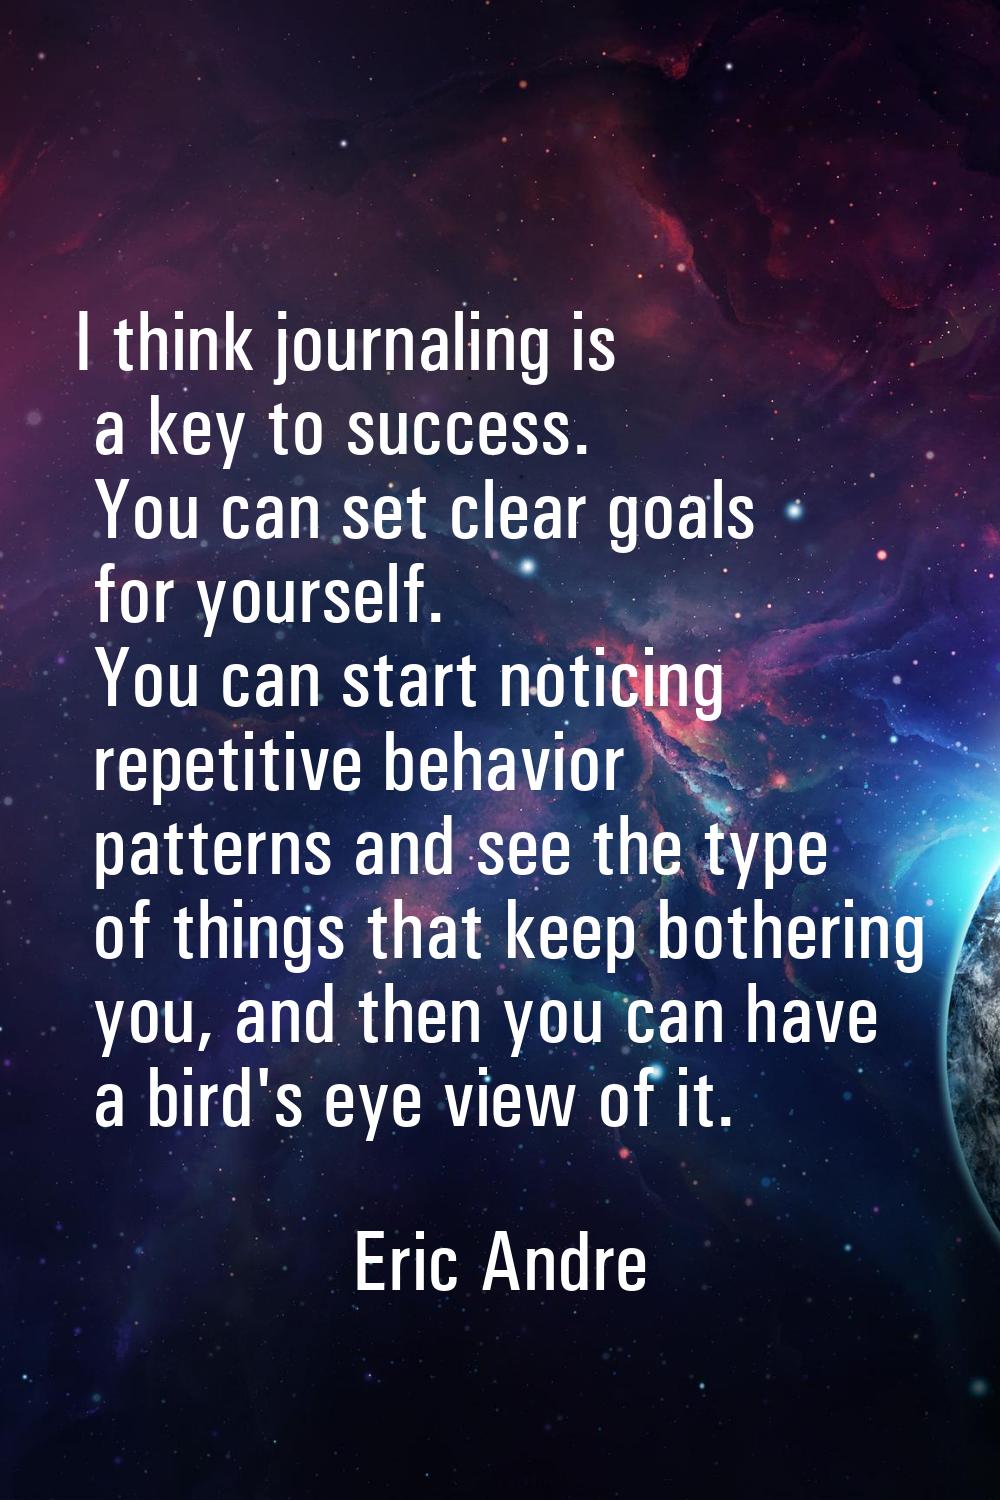 I think journaling is a key to success. You can set clear goals for yourself. You can start noticin